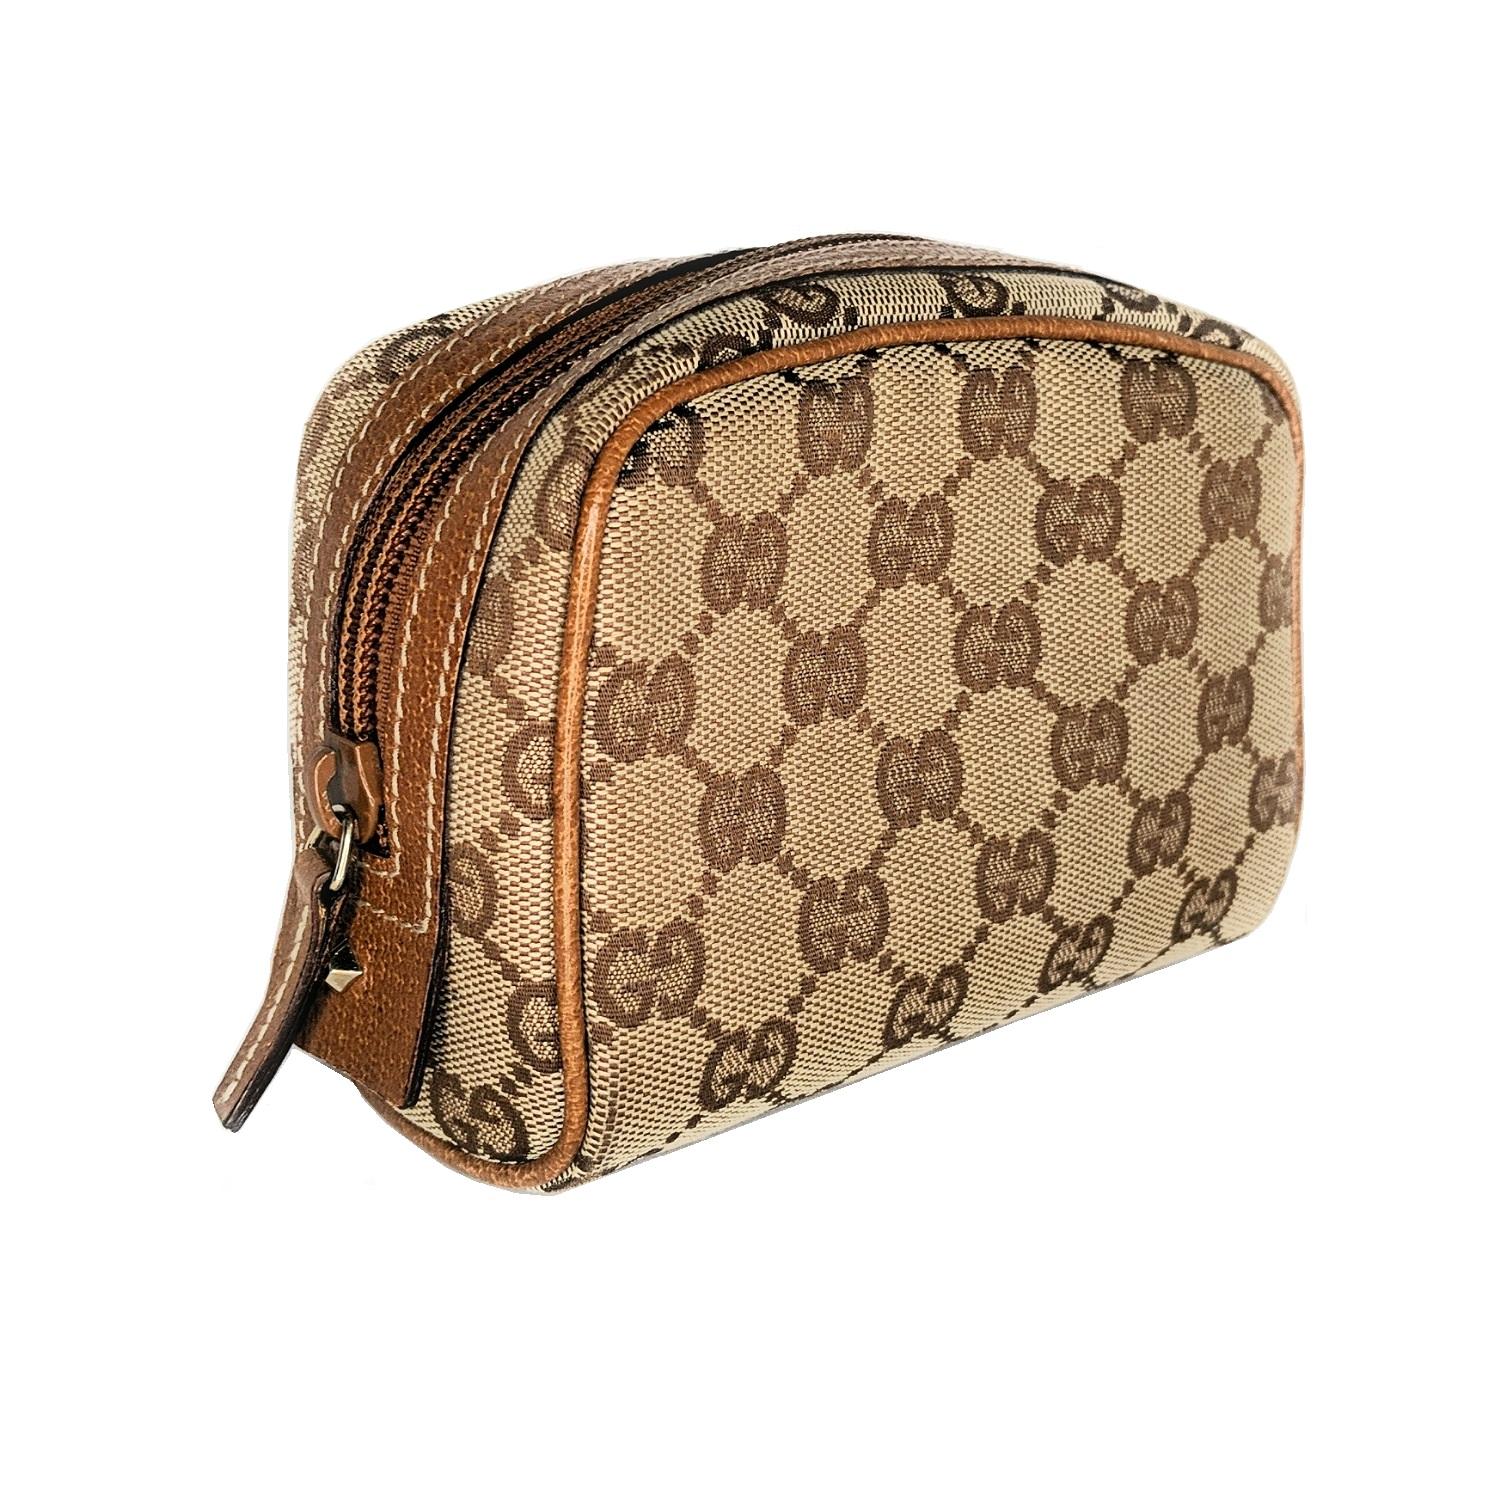 This case is crafted of classic Gucci GG monogram canvas. The case features leather trim for the top zipper with a gold-tone brass horsebit nail head. The zipper opens to a fabric interior.

Designer: Gucci
Material: GG Supreme canvas w/ leather